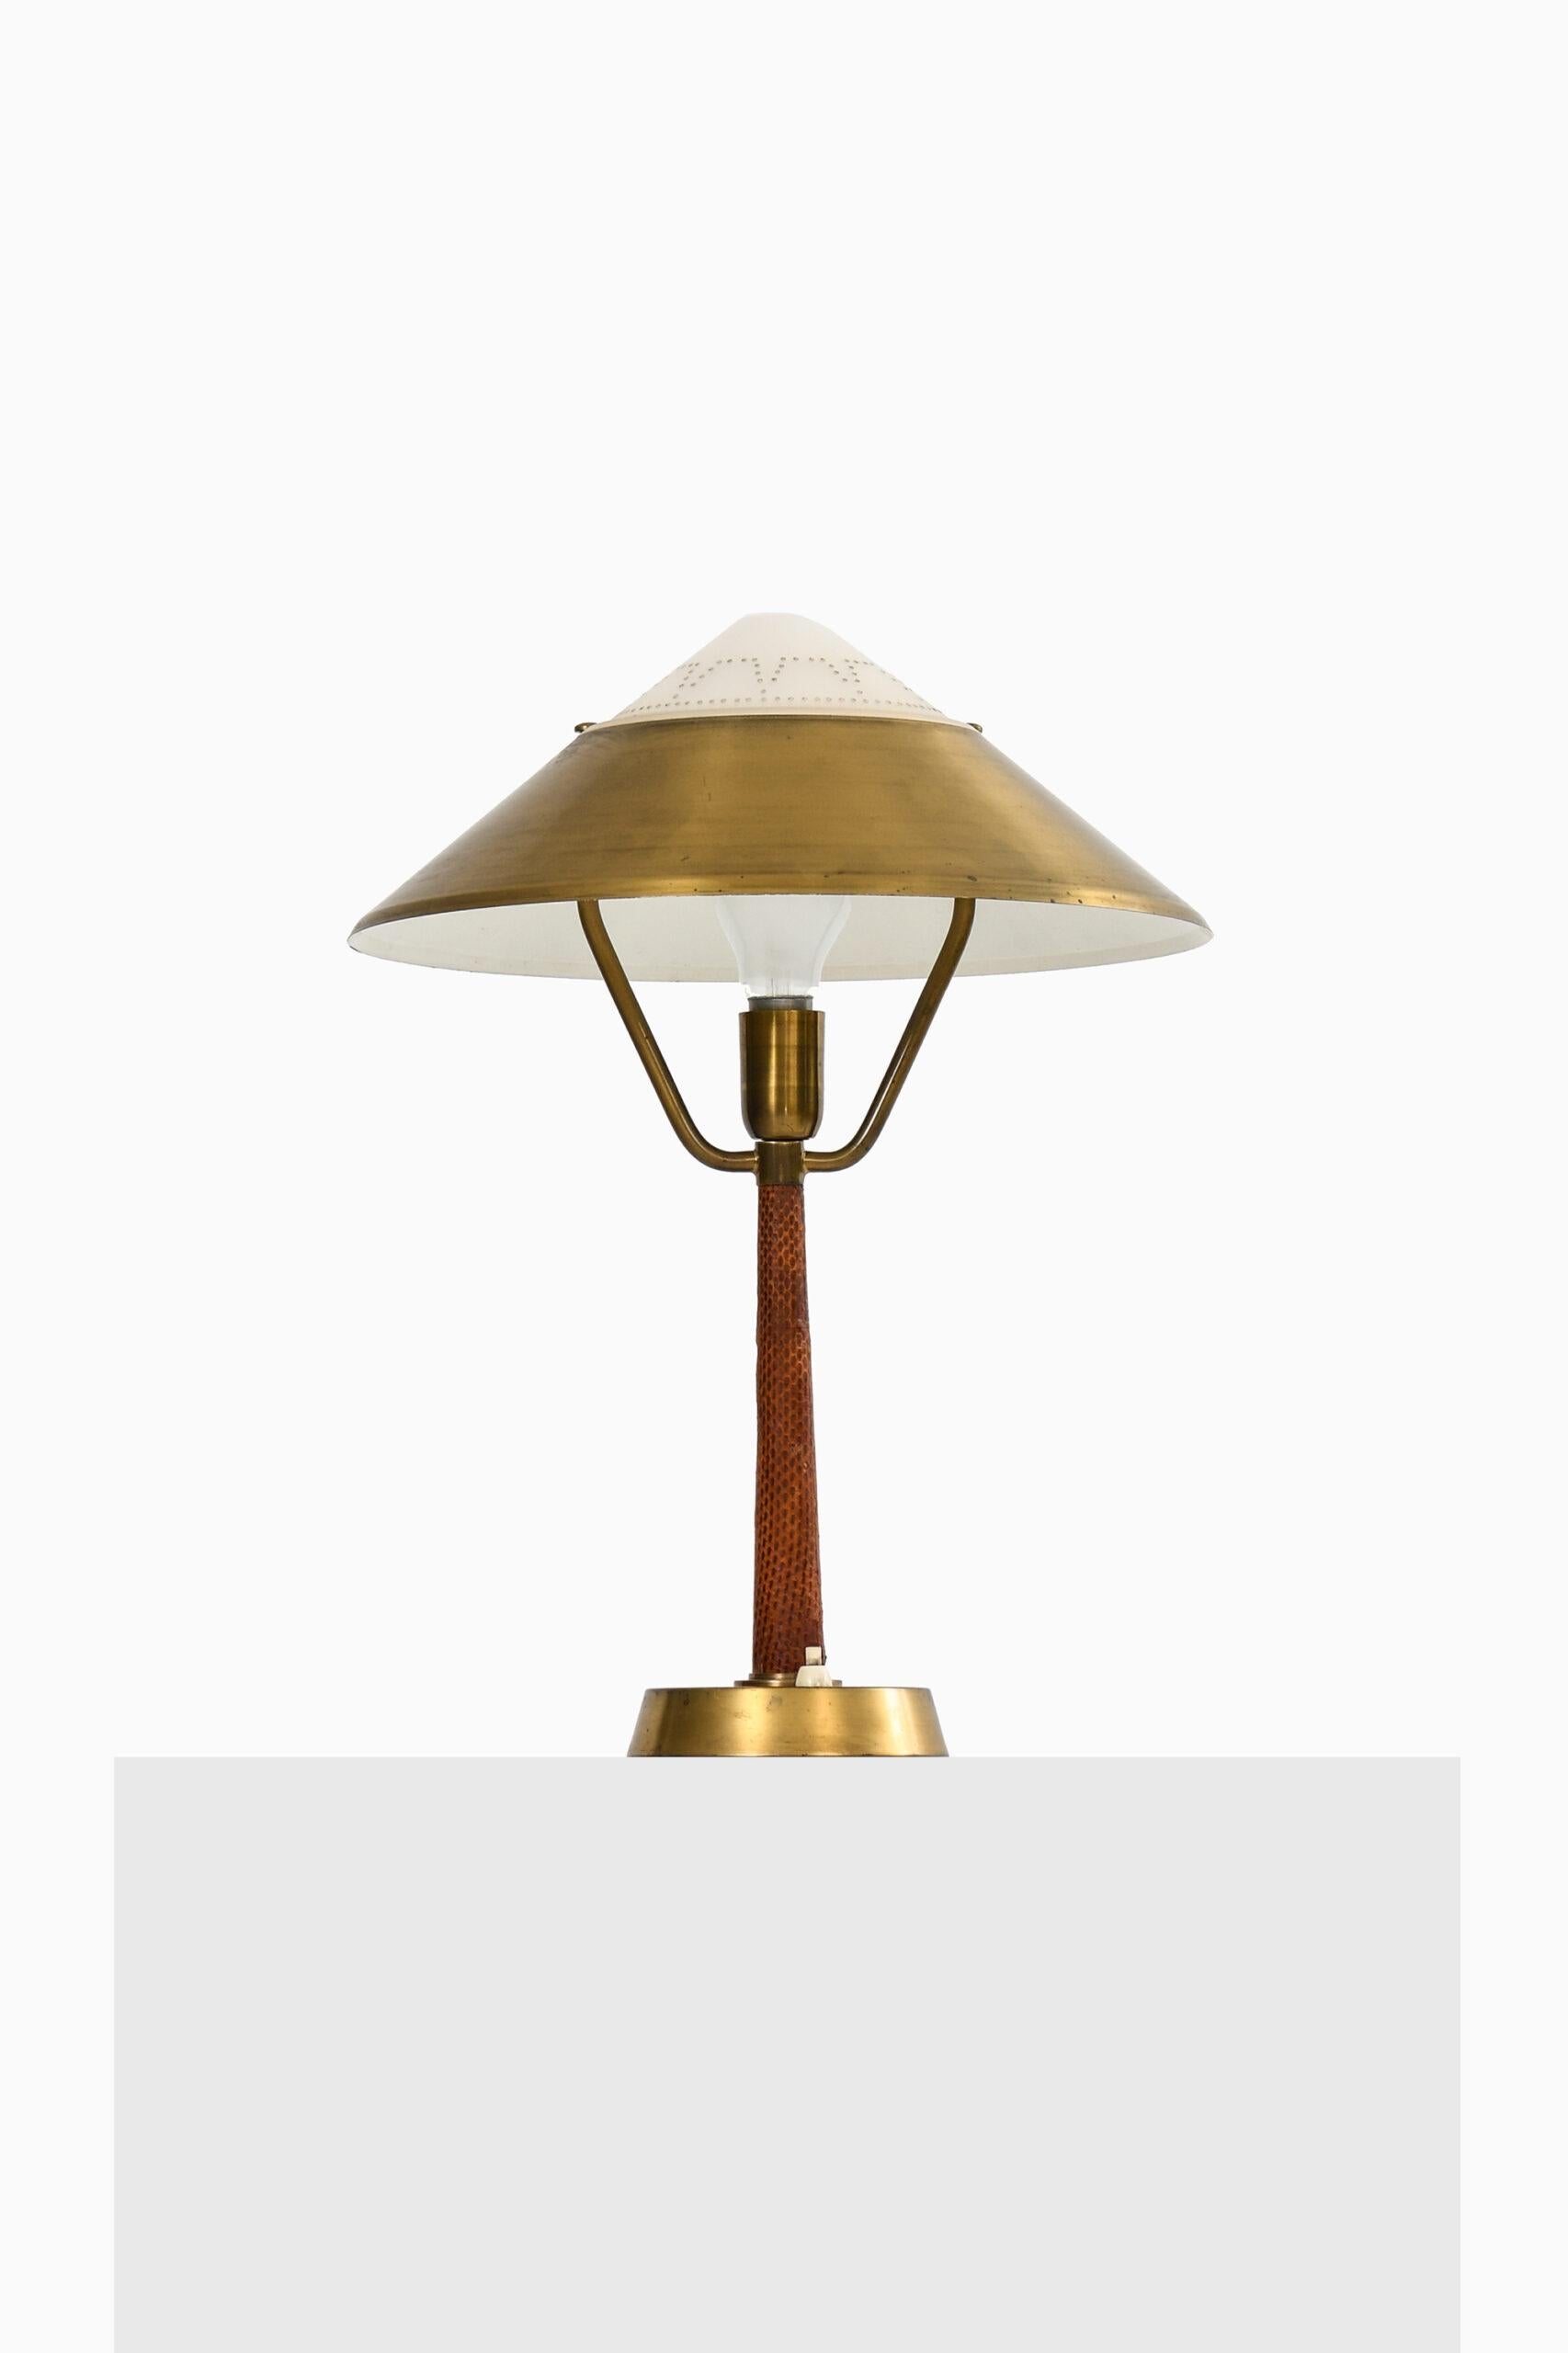 Brass Table Lamp Produced by AB E. Hansson & Co in Malmö, Sweden For Sale